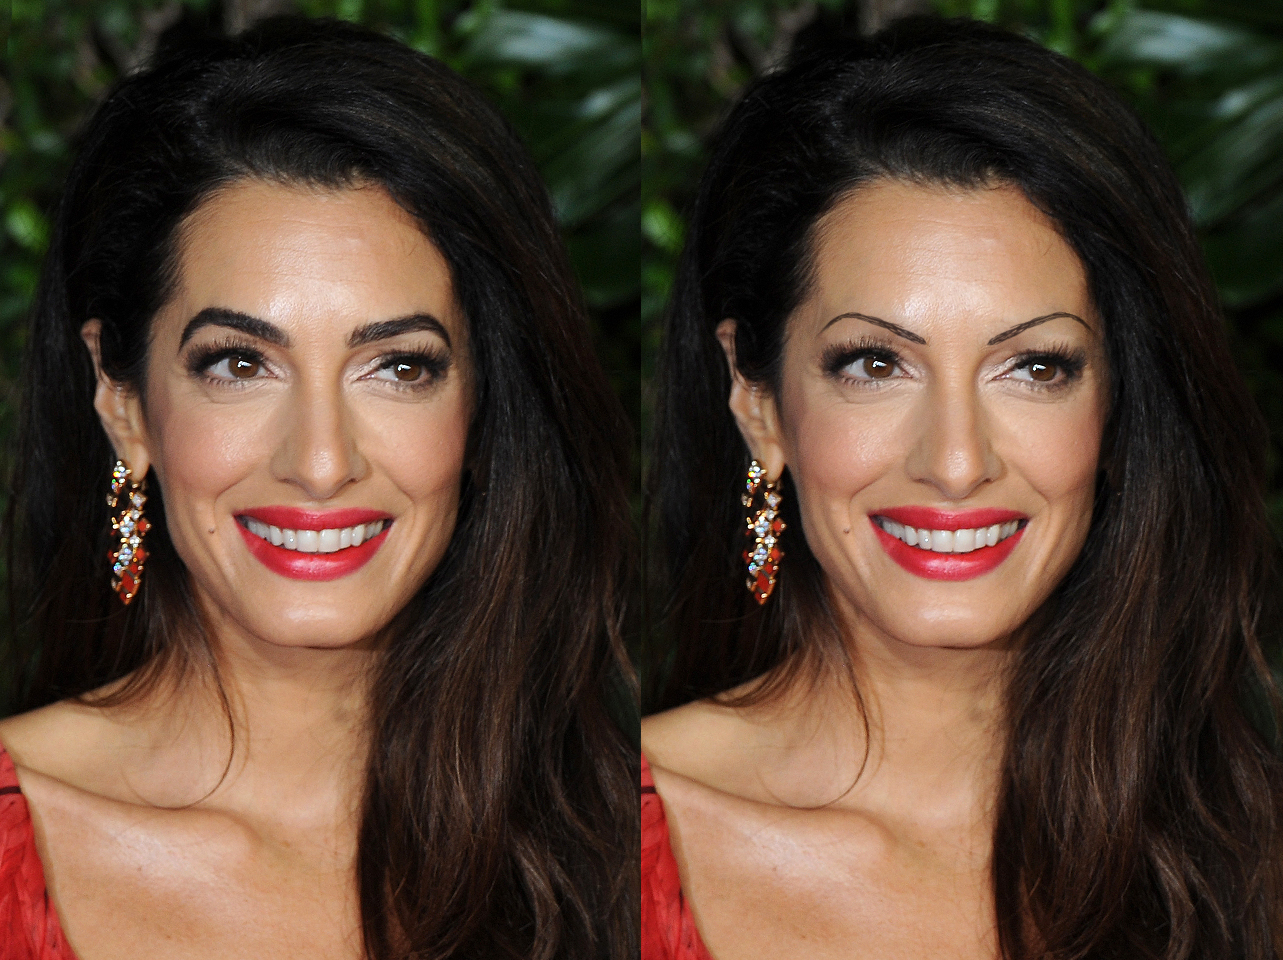 Amal Clooney's signature brows from 2022 vs a digitally edited thin-brow look | Source: Getty Images